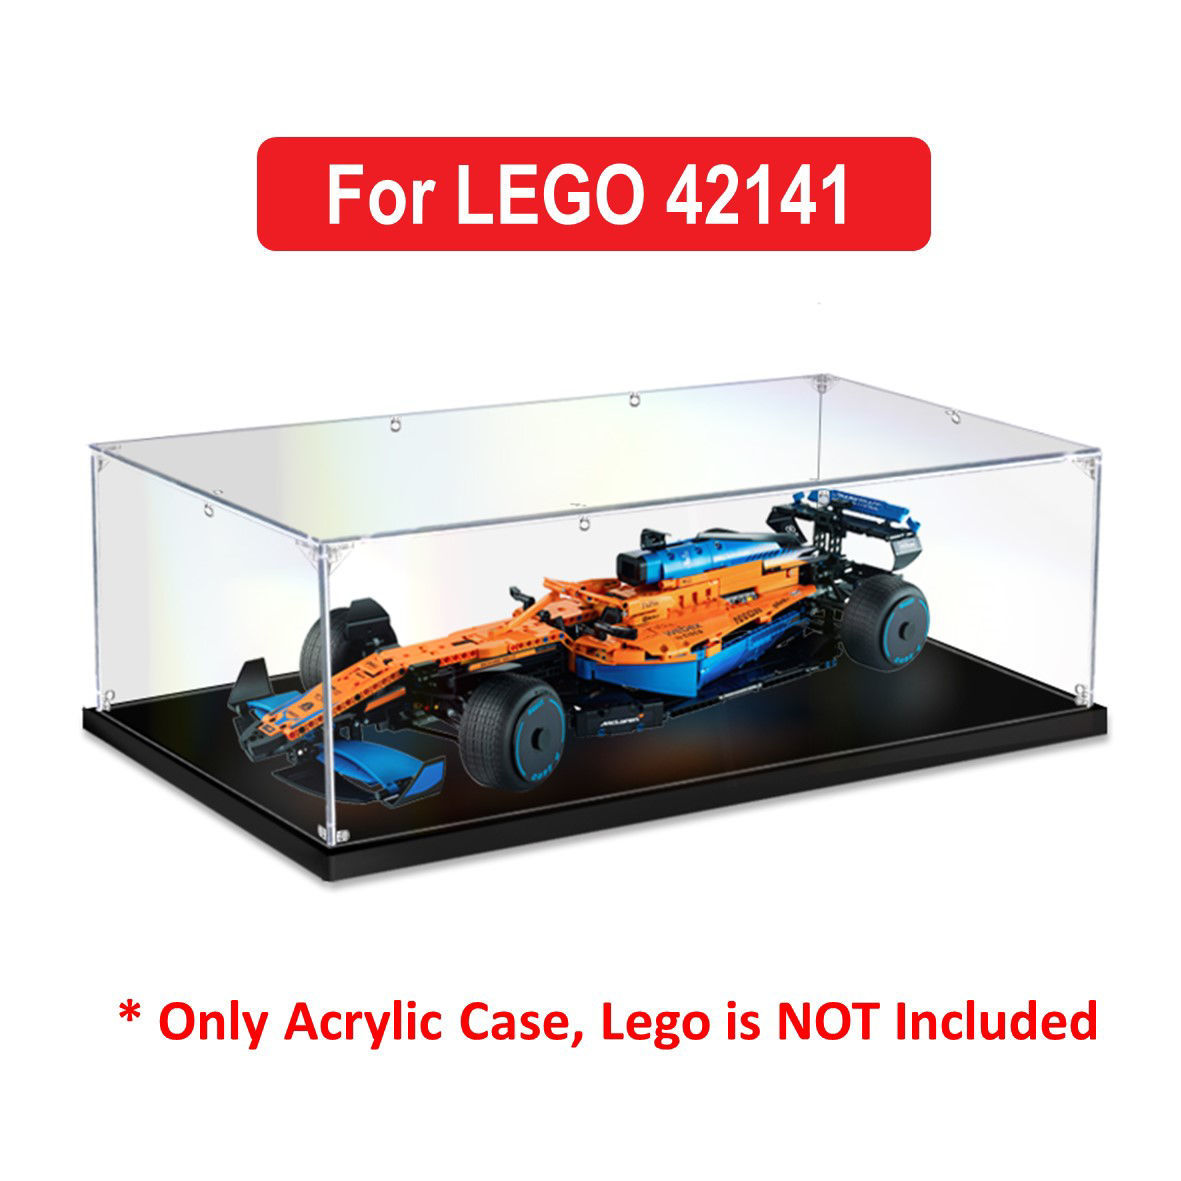 Display Case for Your Lego Set, Dust Proof, Glue Free. Acrylic